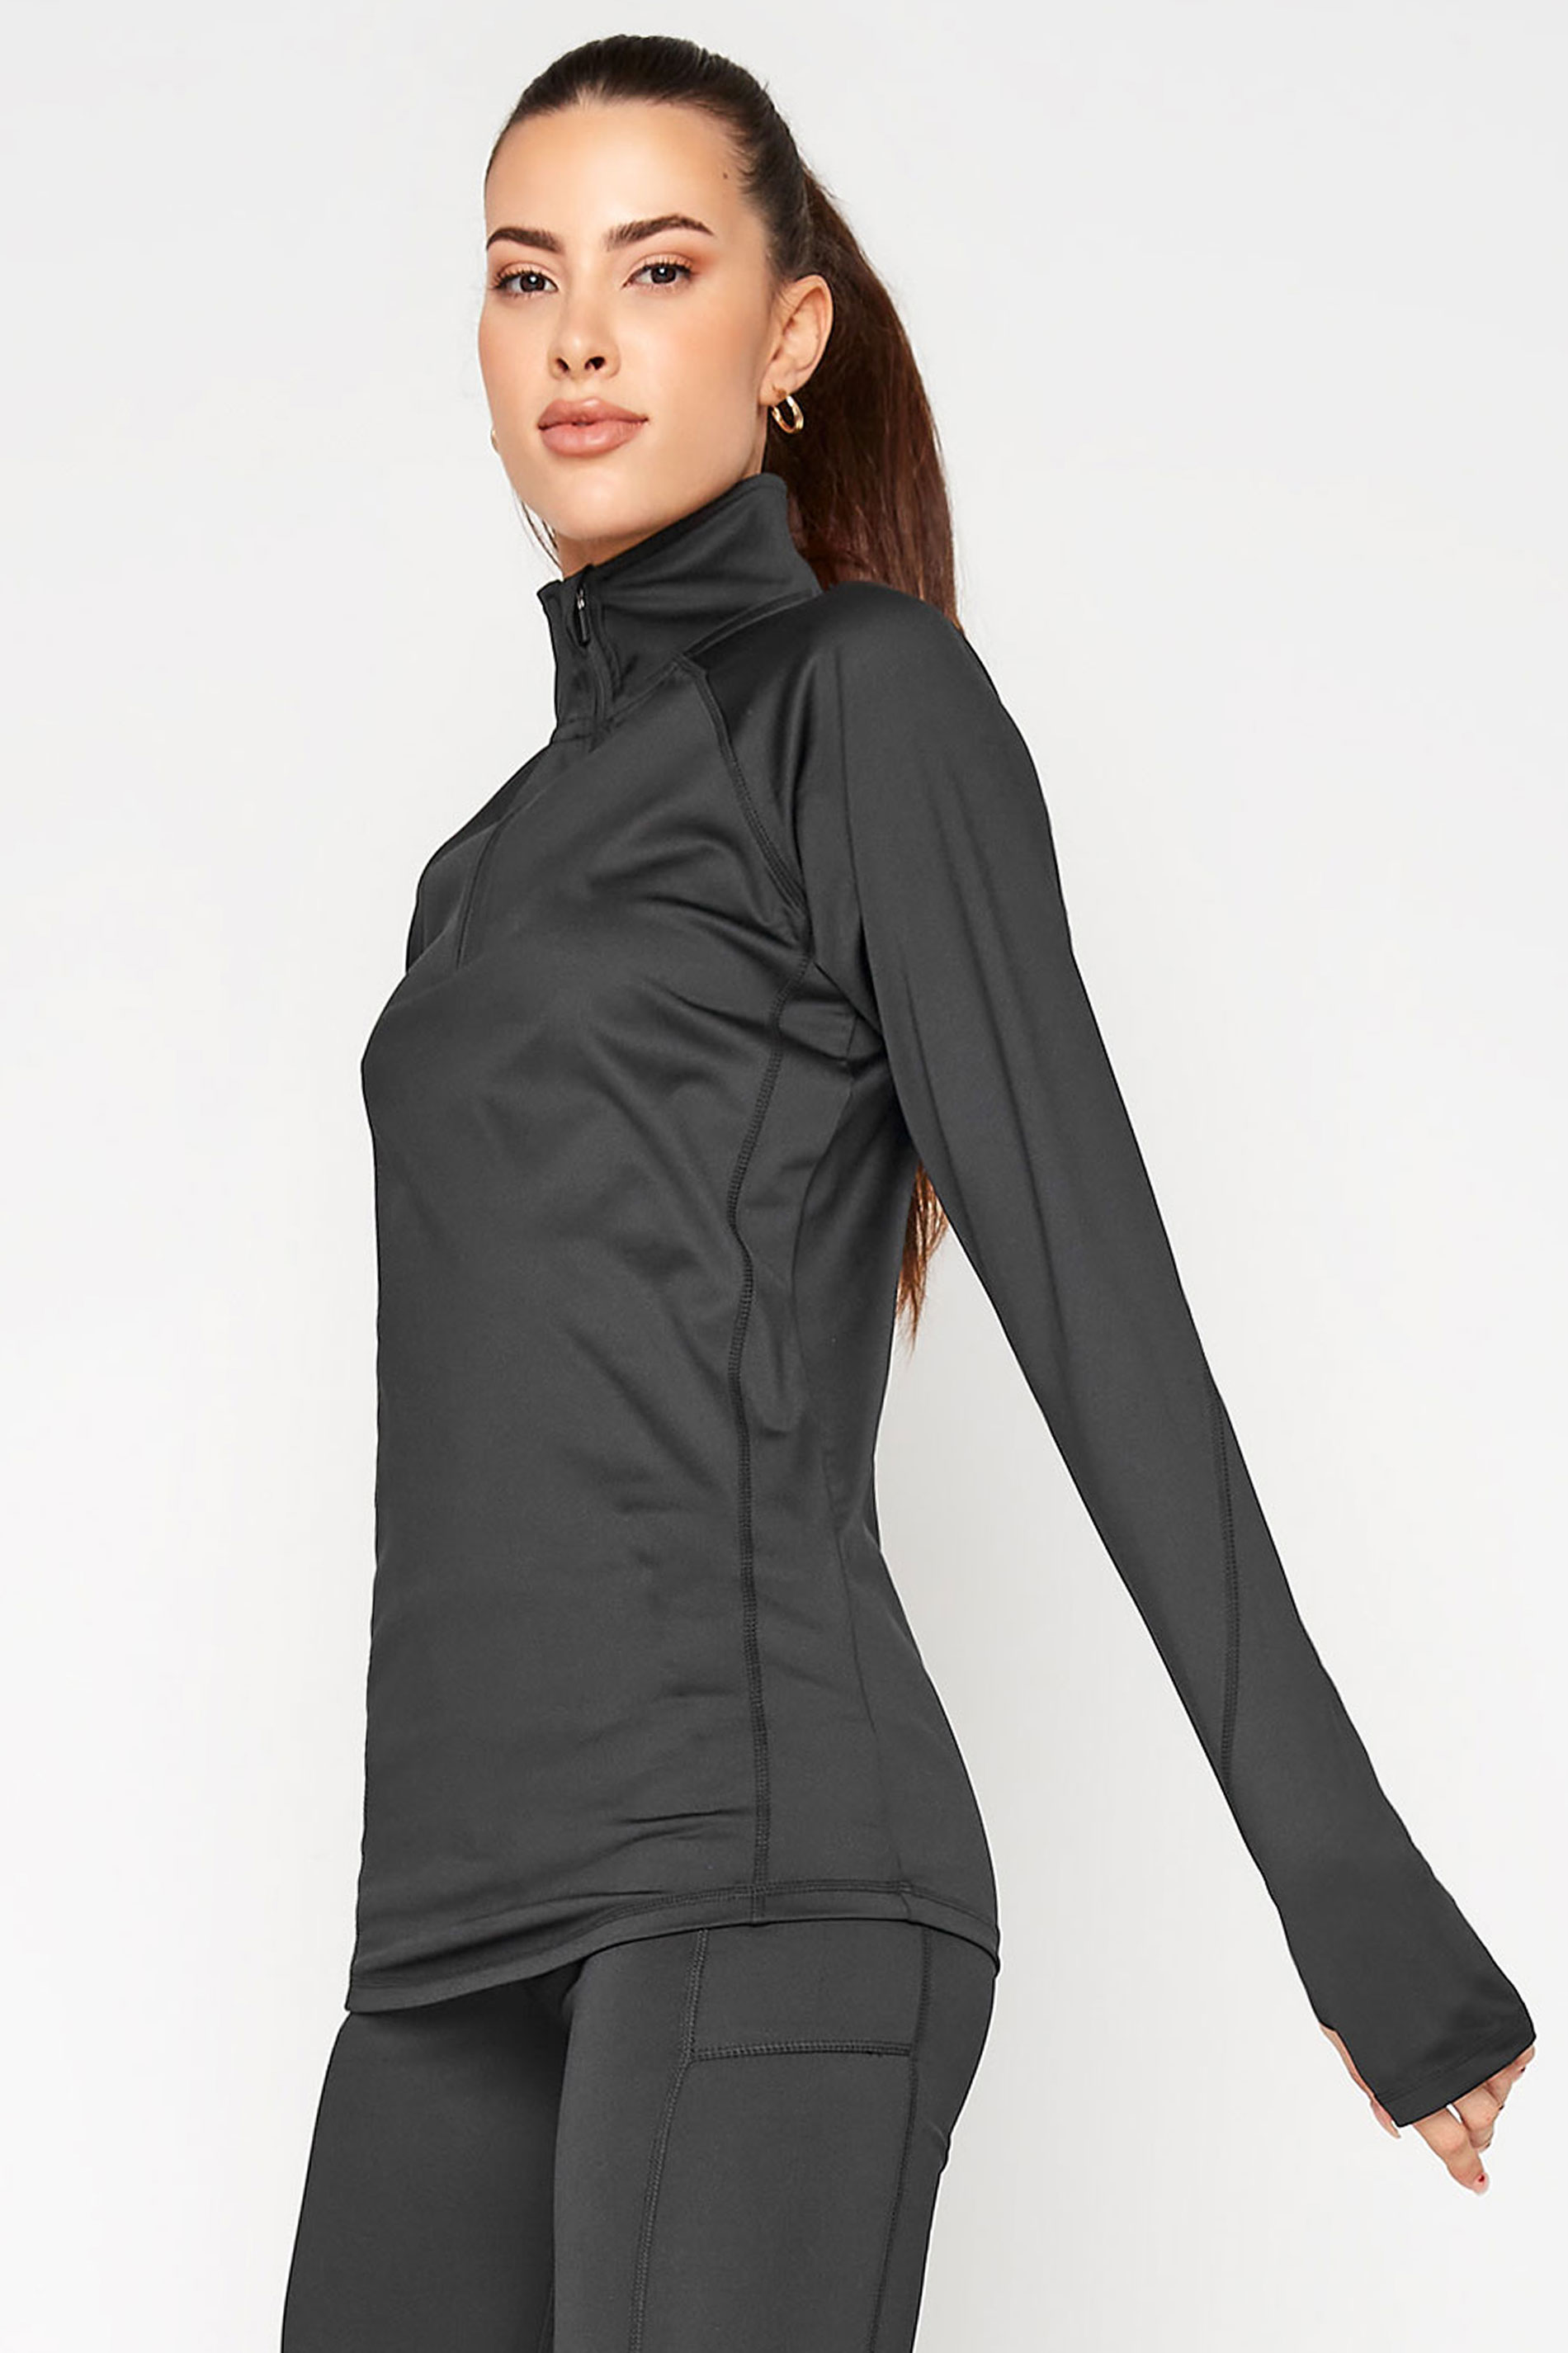 LTS ACTIVE Tall Black Funnel Neck Running Top 1